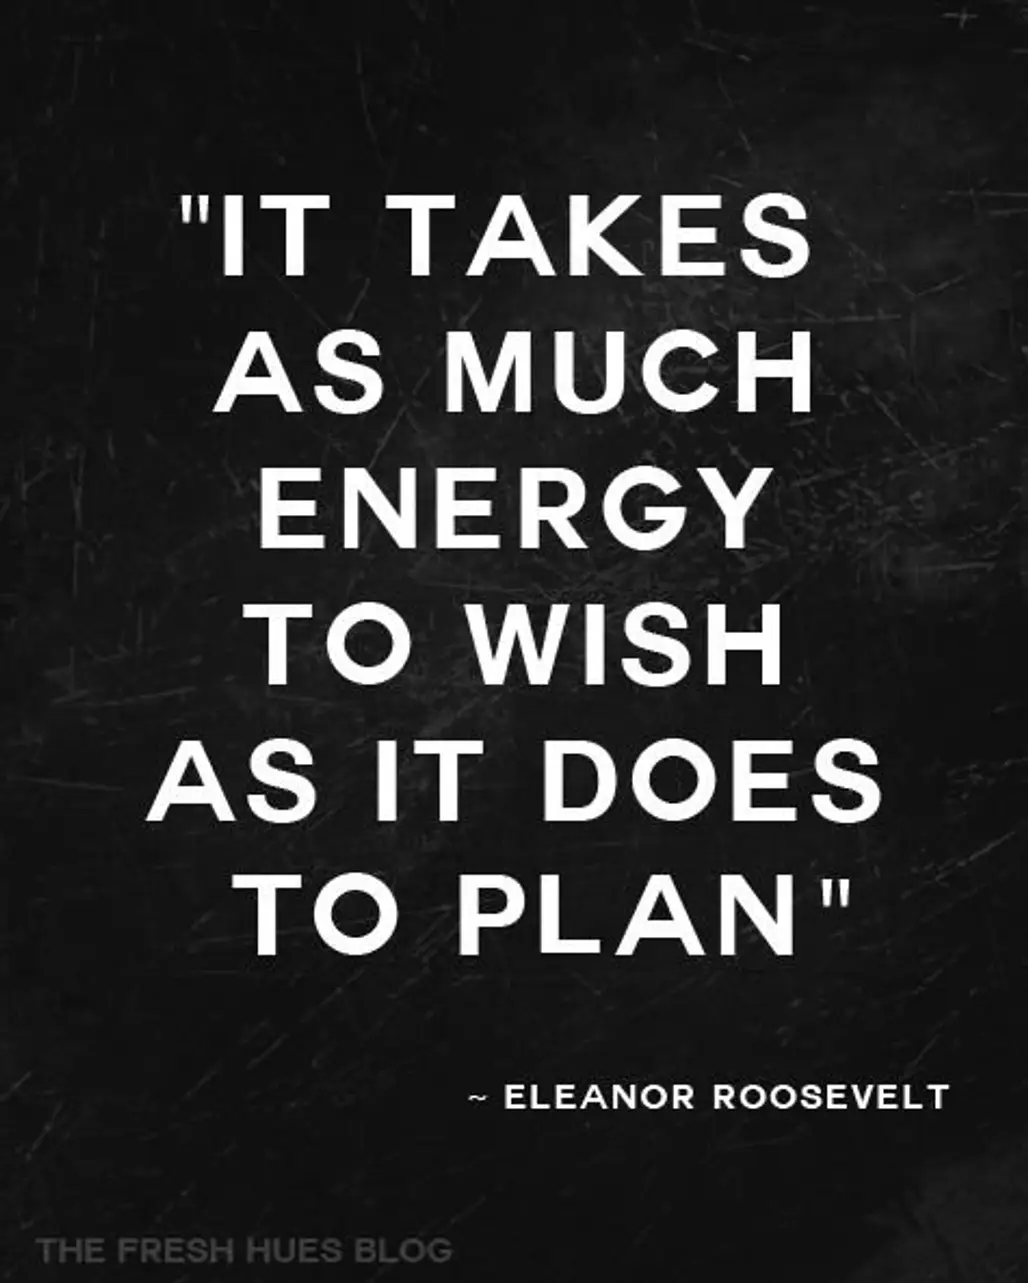 “It Takes as Much Energy to Wish as It Does to Plan.”